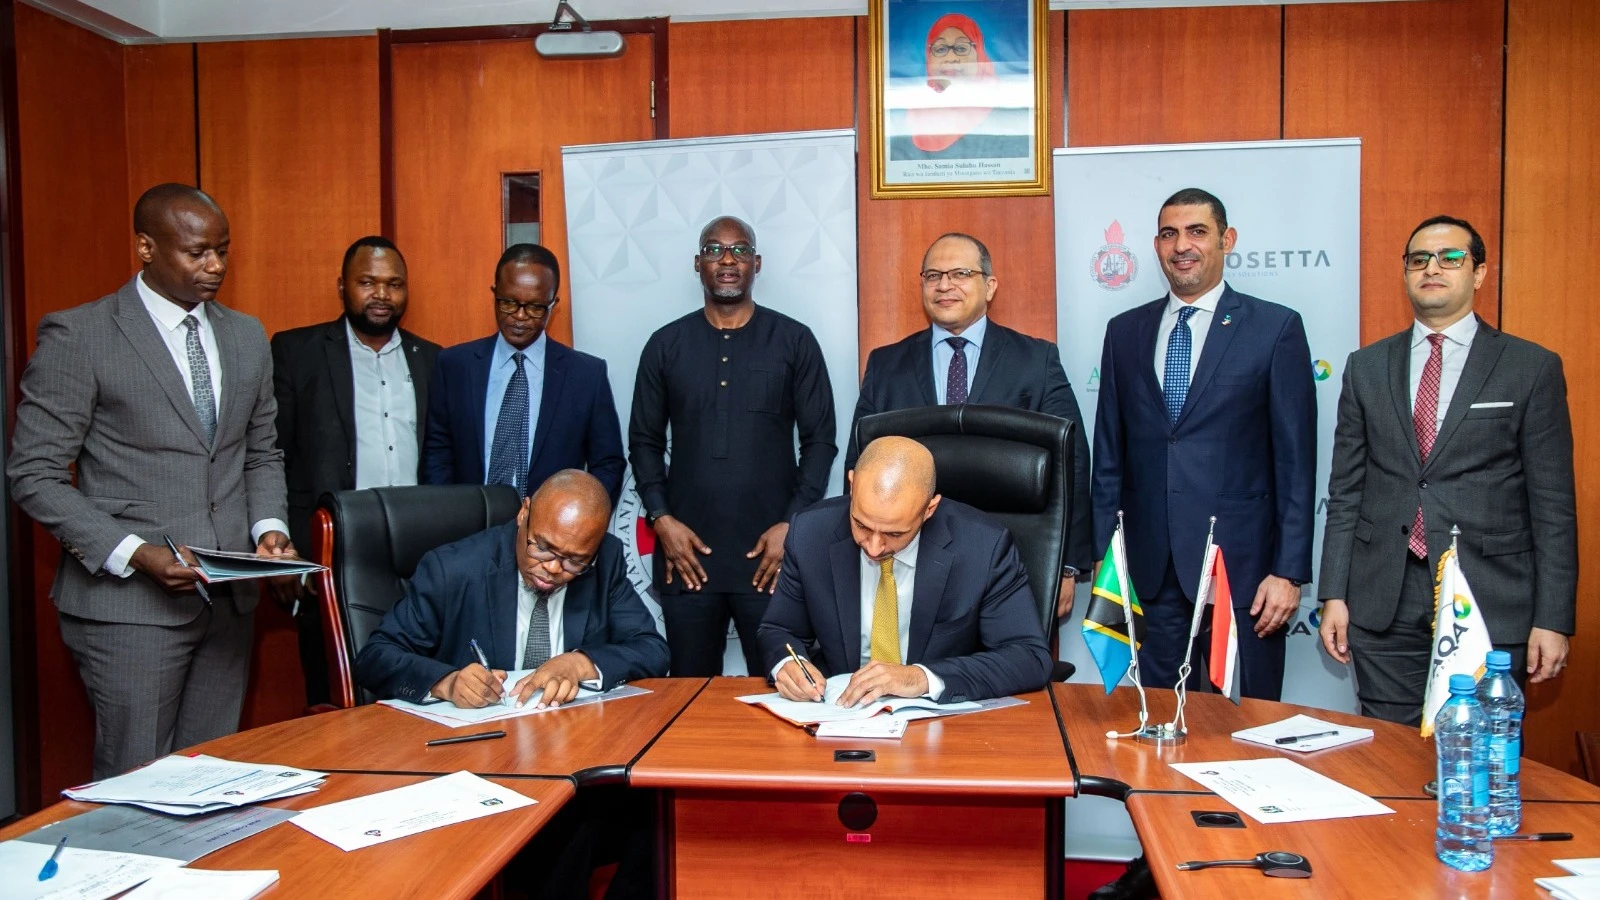 Egyptian Company Rosetta managing director Karim Shaaban (R) signs an agreement on the Mini LNG project with the Tanzania Petroleum Development Corporation (TPDF). Left (signing) is the TPDC director general, Mussa Makame. 